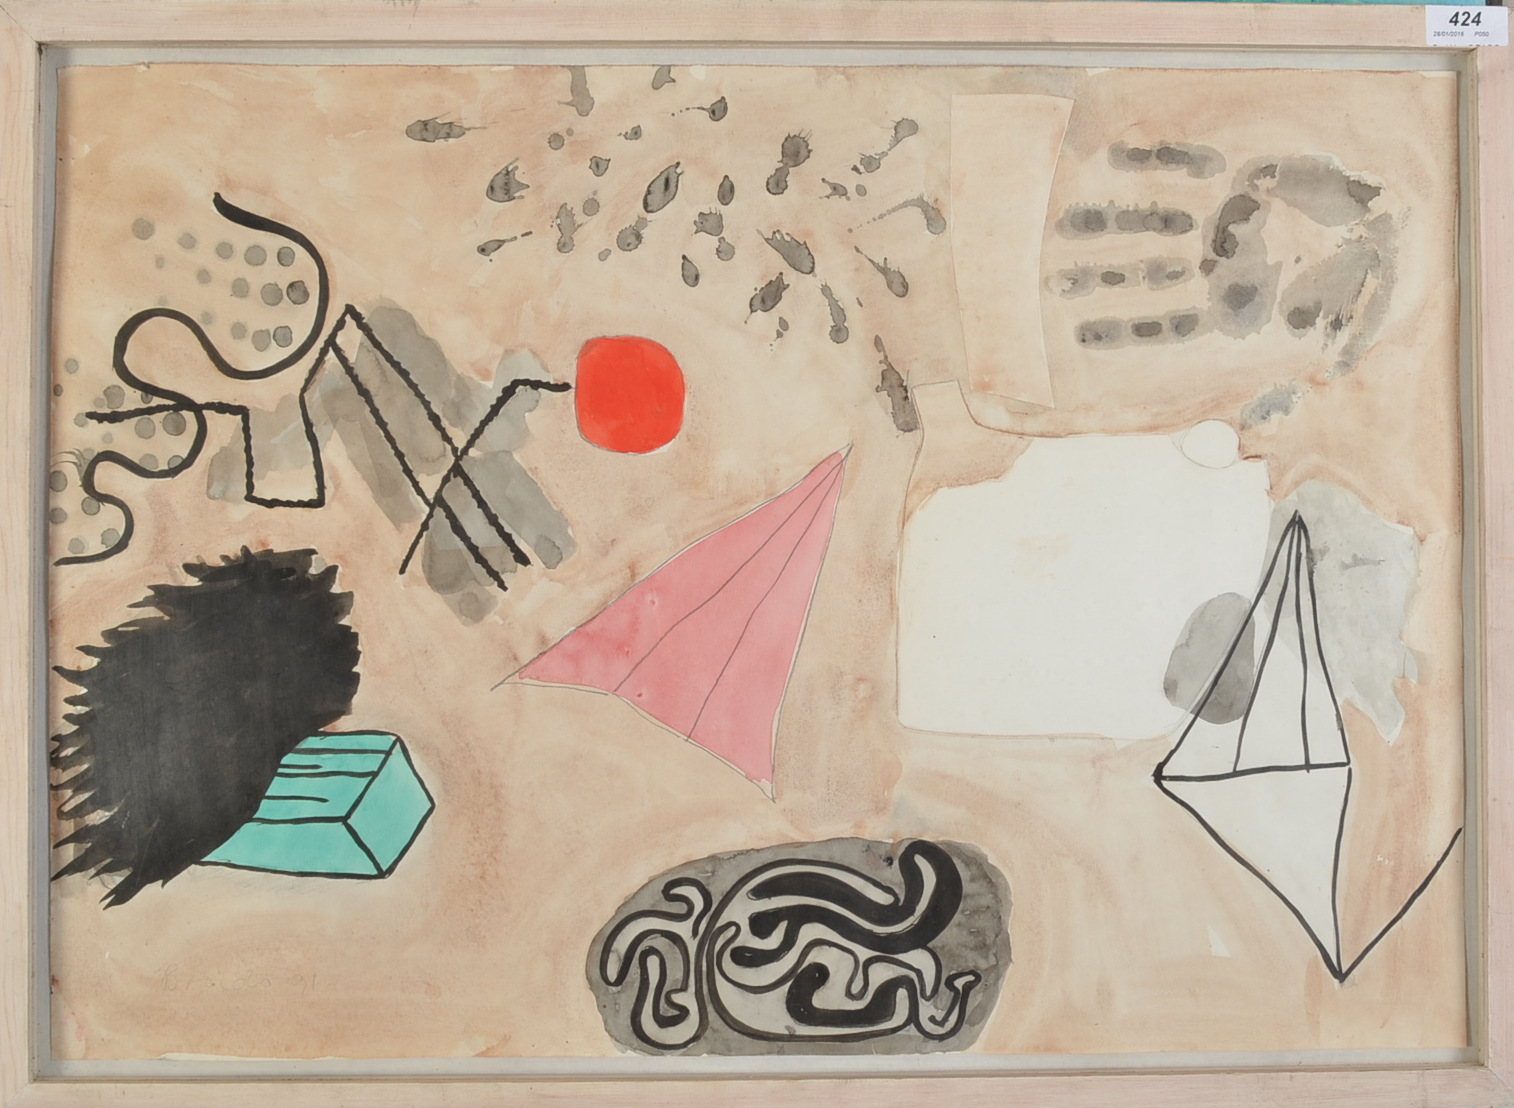 MICHAEL BROIDO
Untitled
Mixed media on paper
1991
69 x 50cm
The Michael Broido Collection
Michael - Image 2 of 2